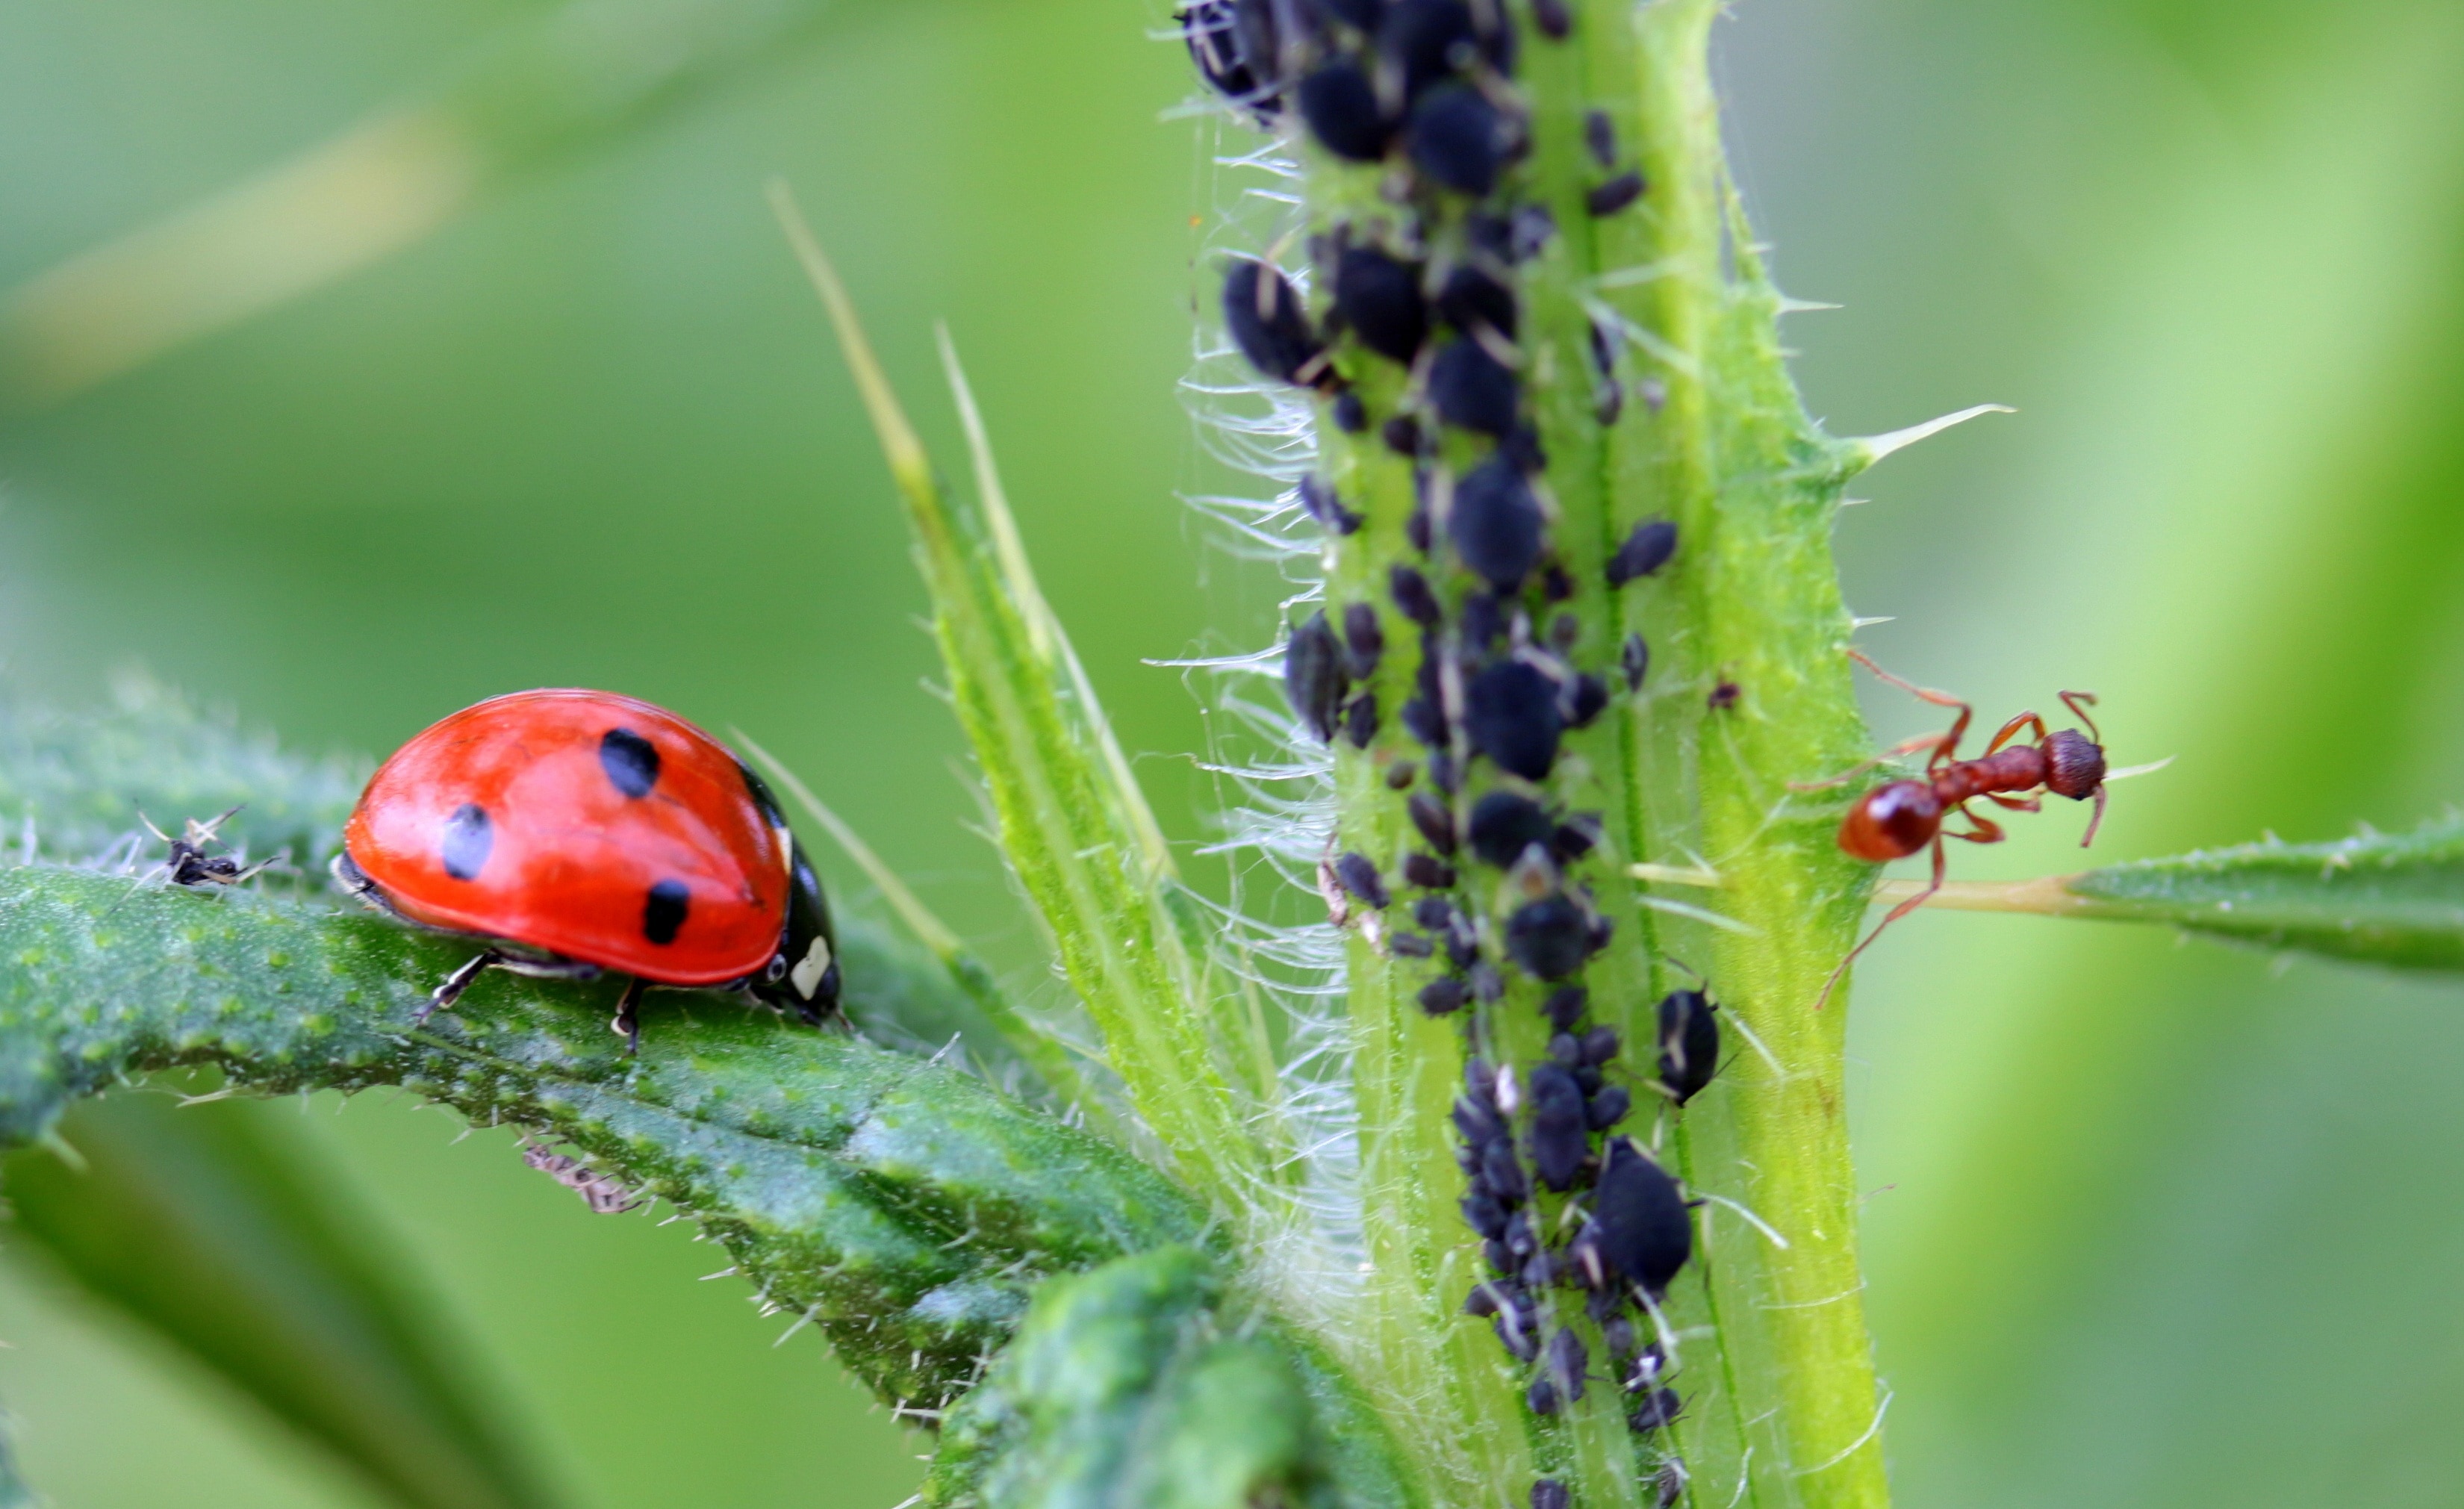 red ladybug and fire ant